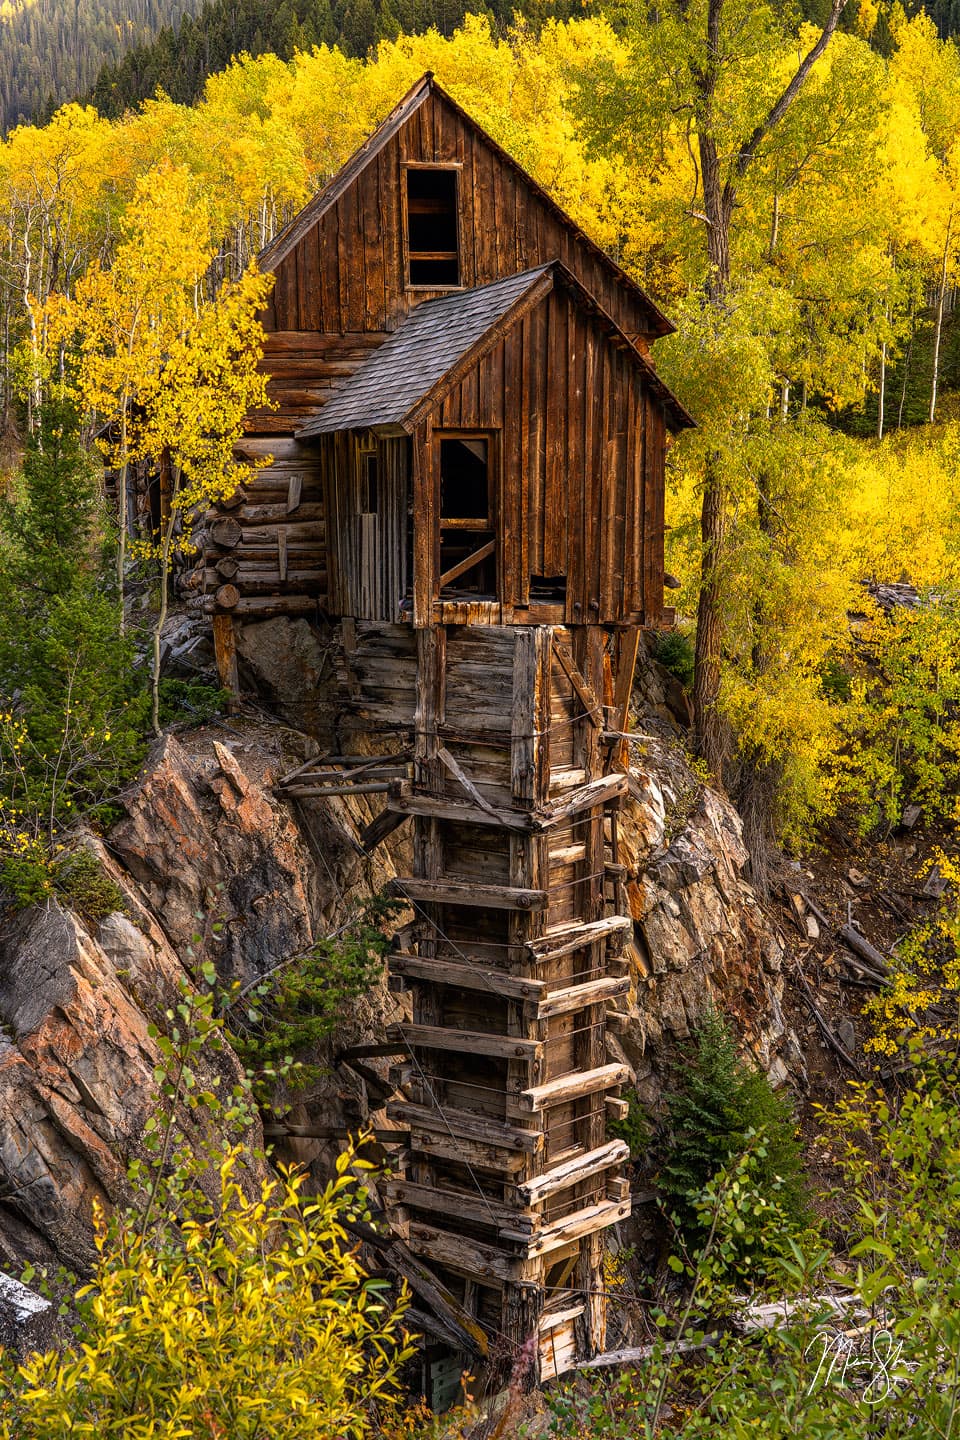 The famous Crystal Mill clothed in autumn splendor